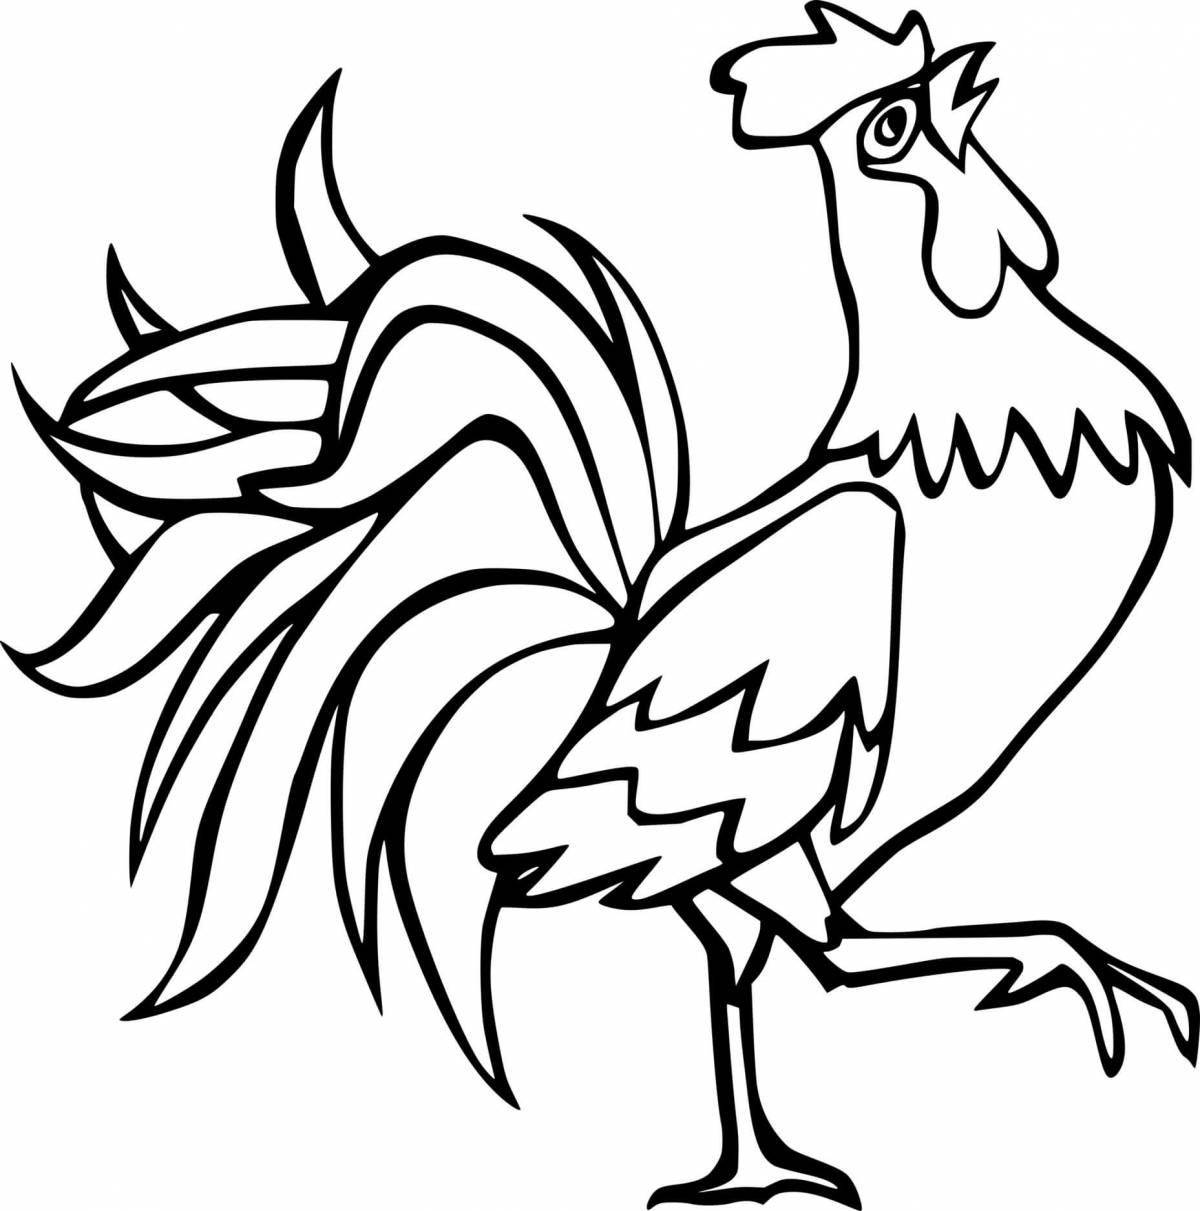 Coloring book shiny rooster